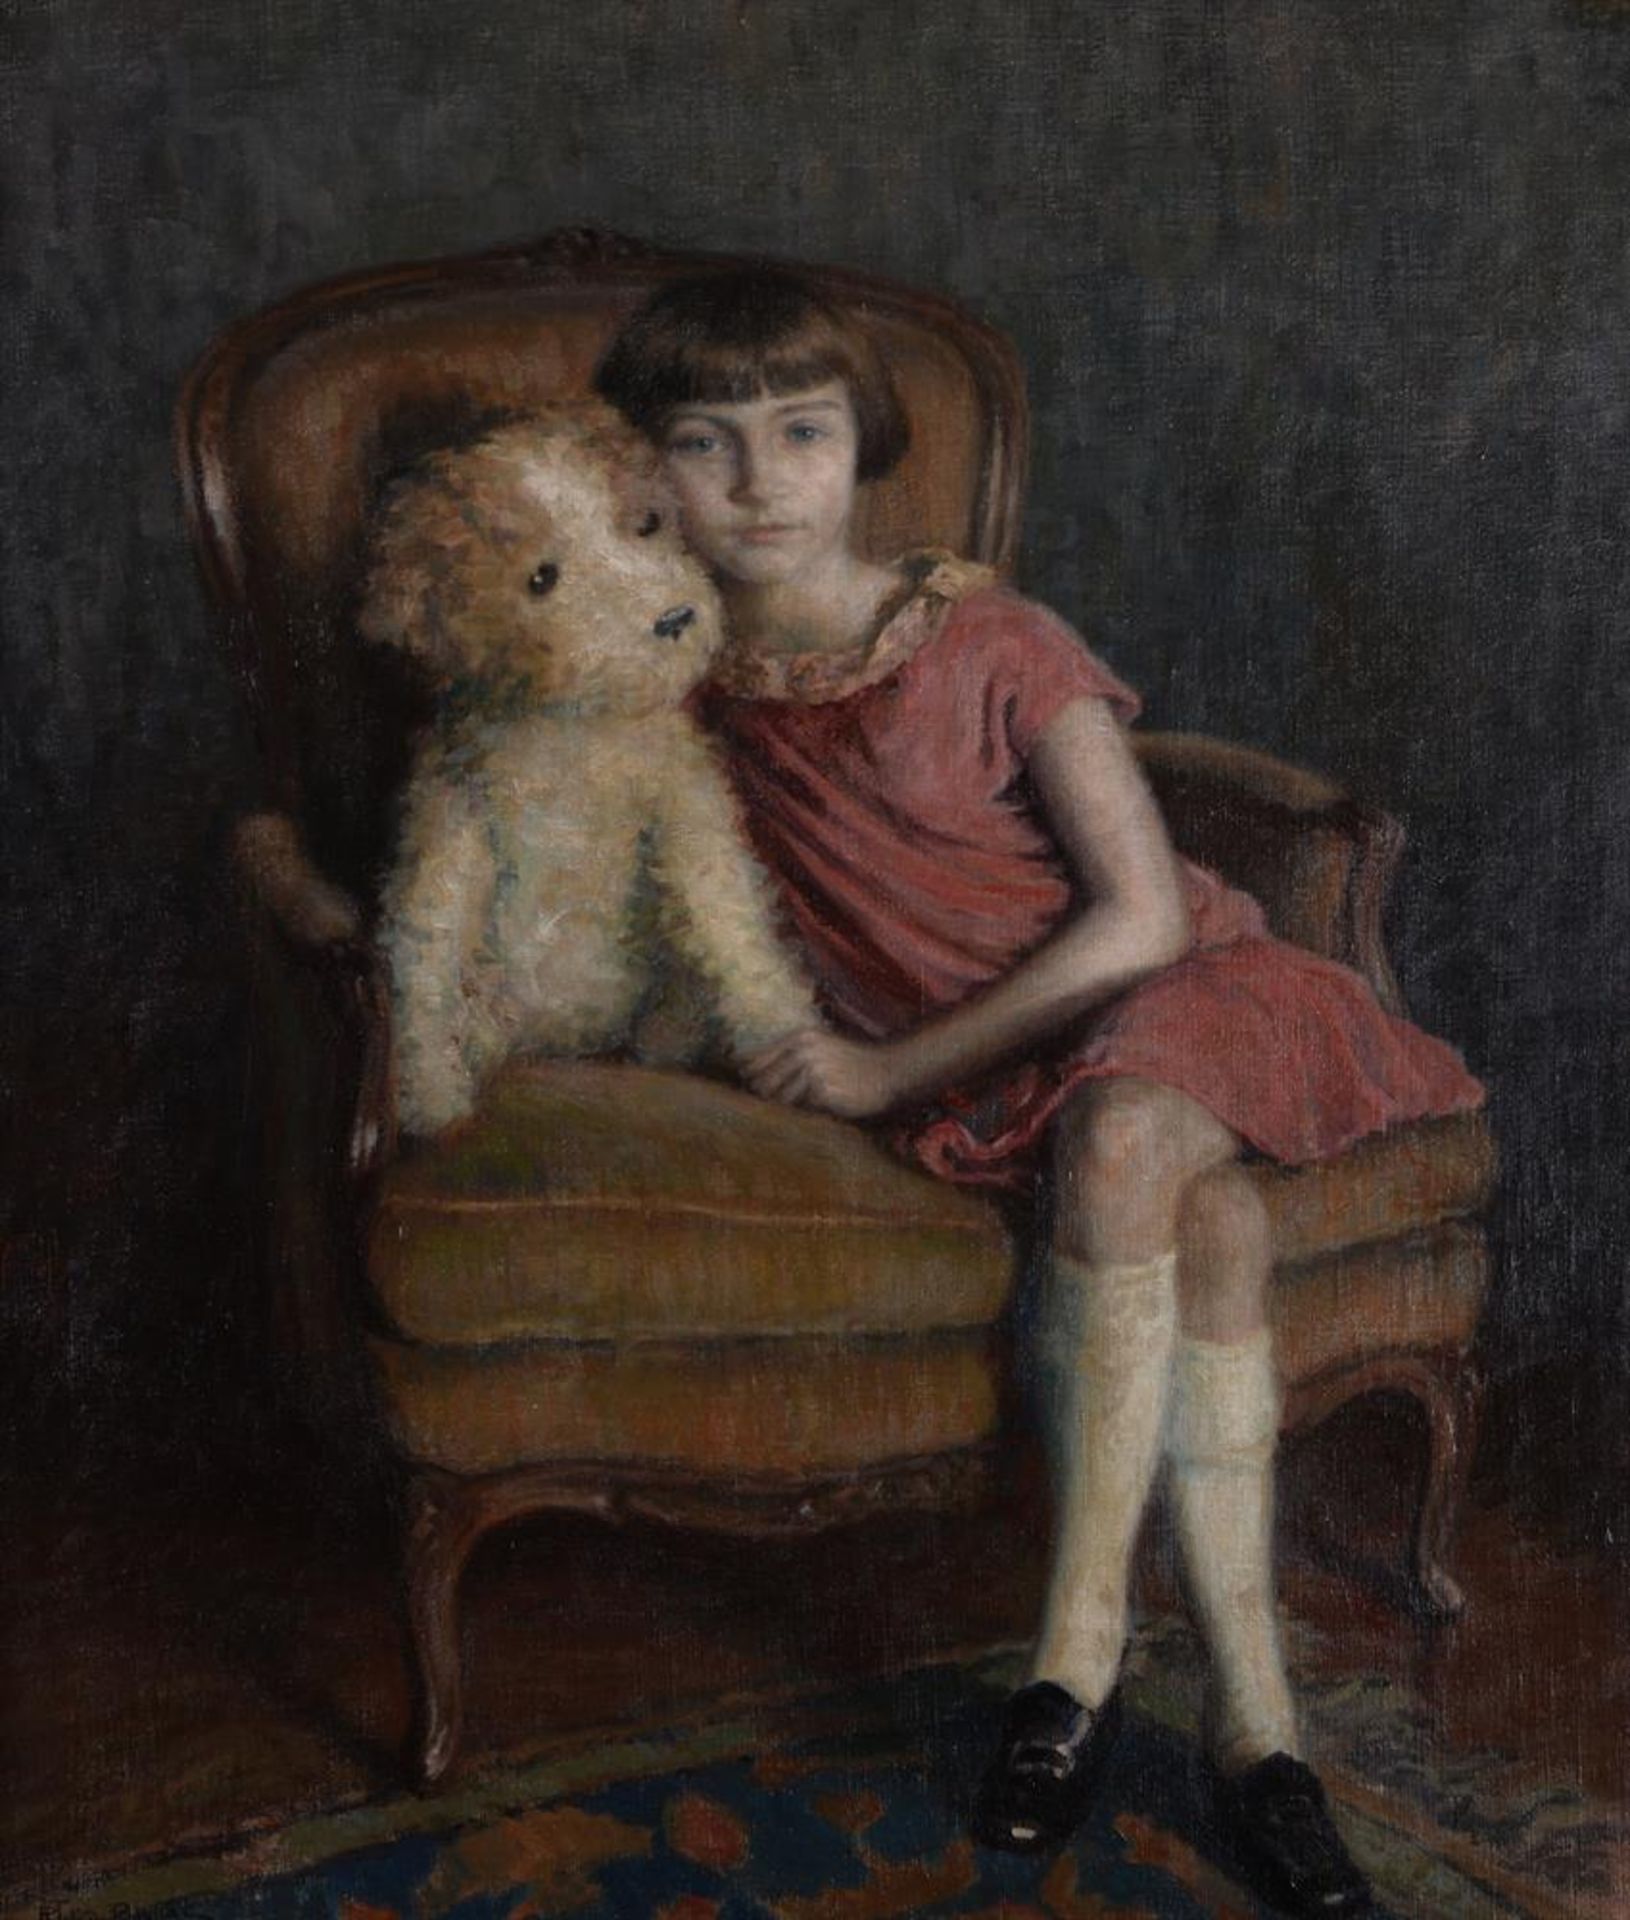 RENE MARIE JOLY DE BEYNAC (FRENCH 1876-1978), PORTRAIT OF A GIRL WITH A TOY DOG - Image 2 of 3